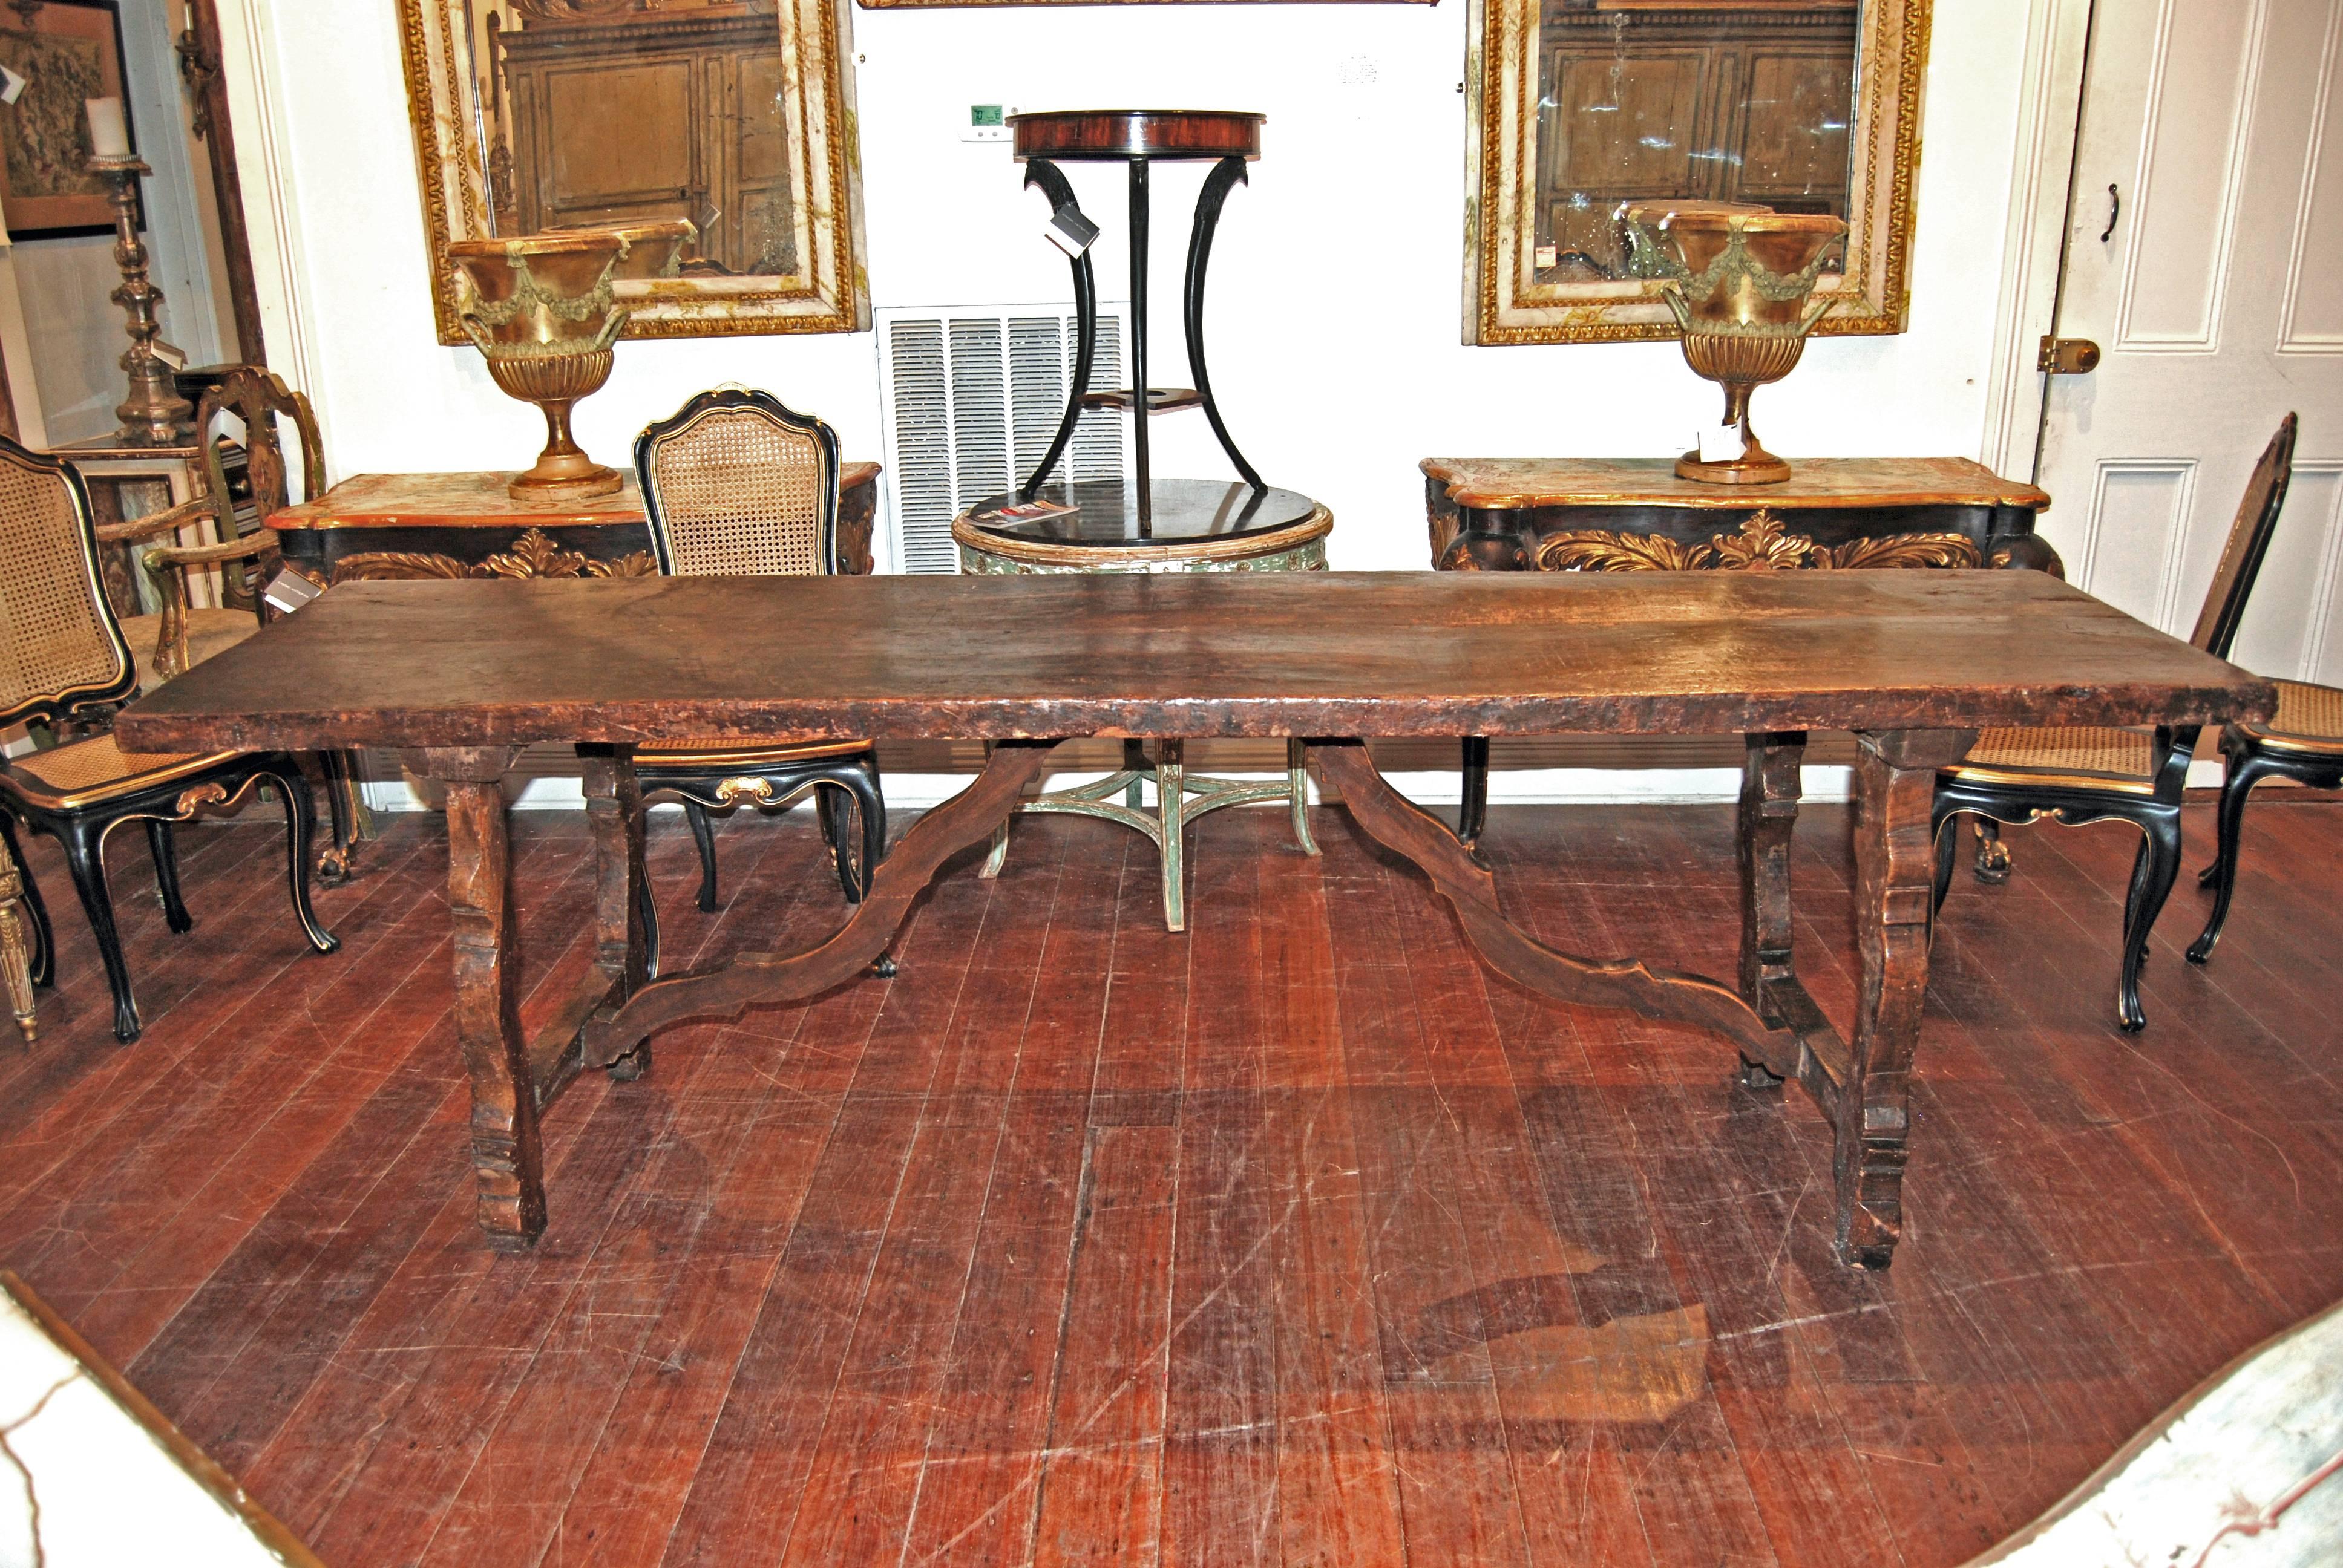 Fabulous 18th century table with original wooden stretcher.